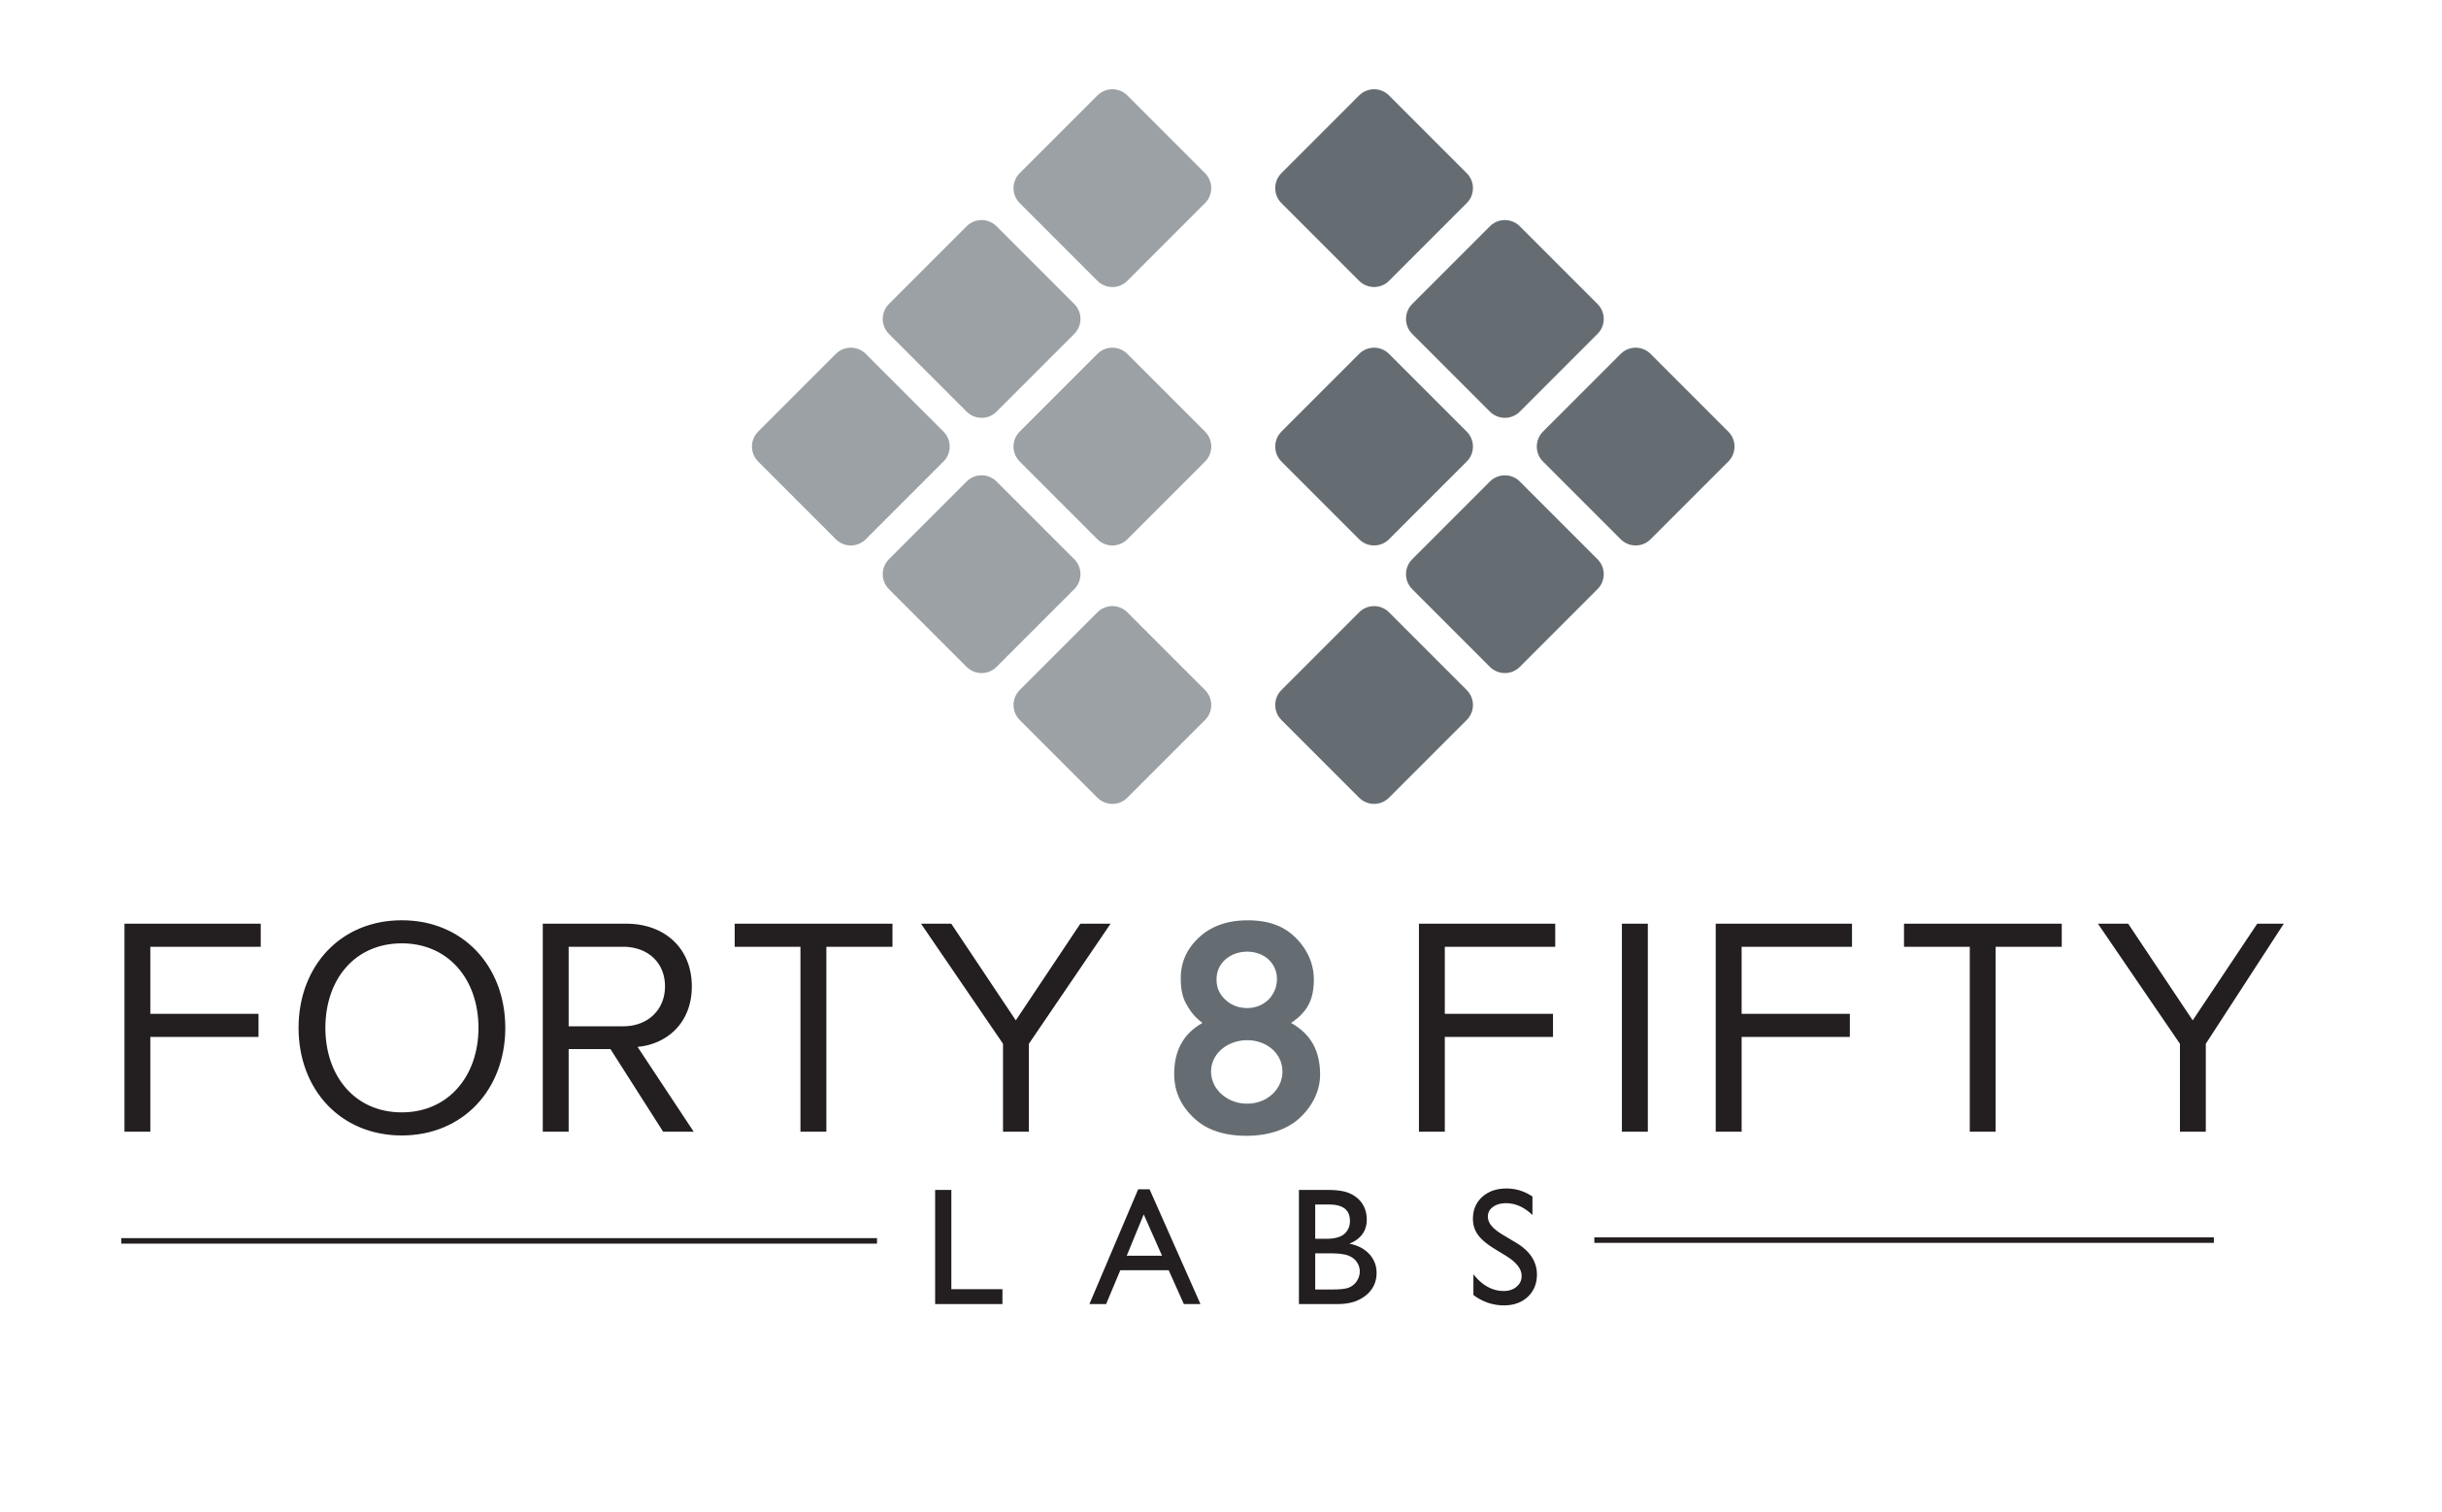 forty8fifty labs 로고